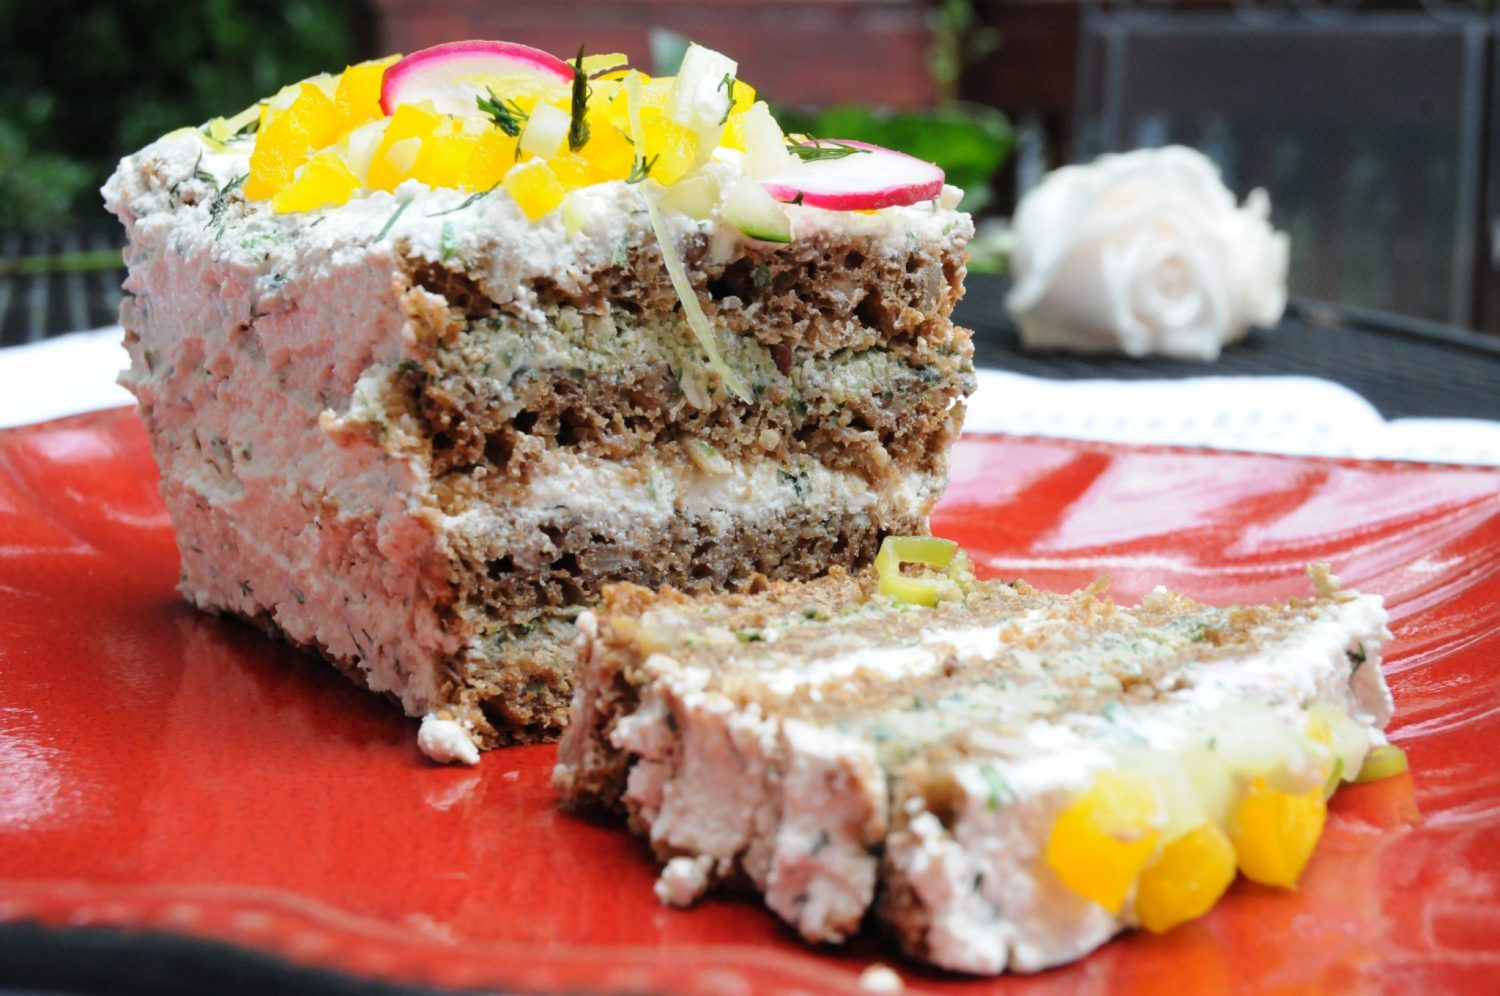 bread cake layered with spread